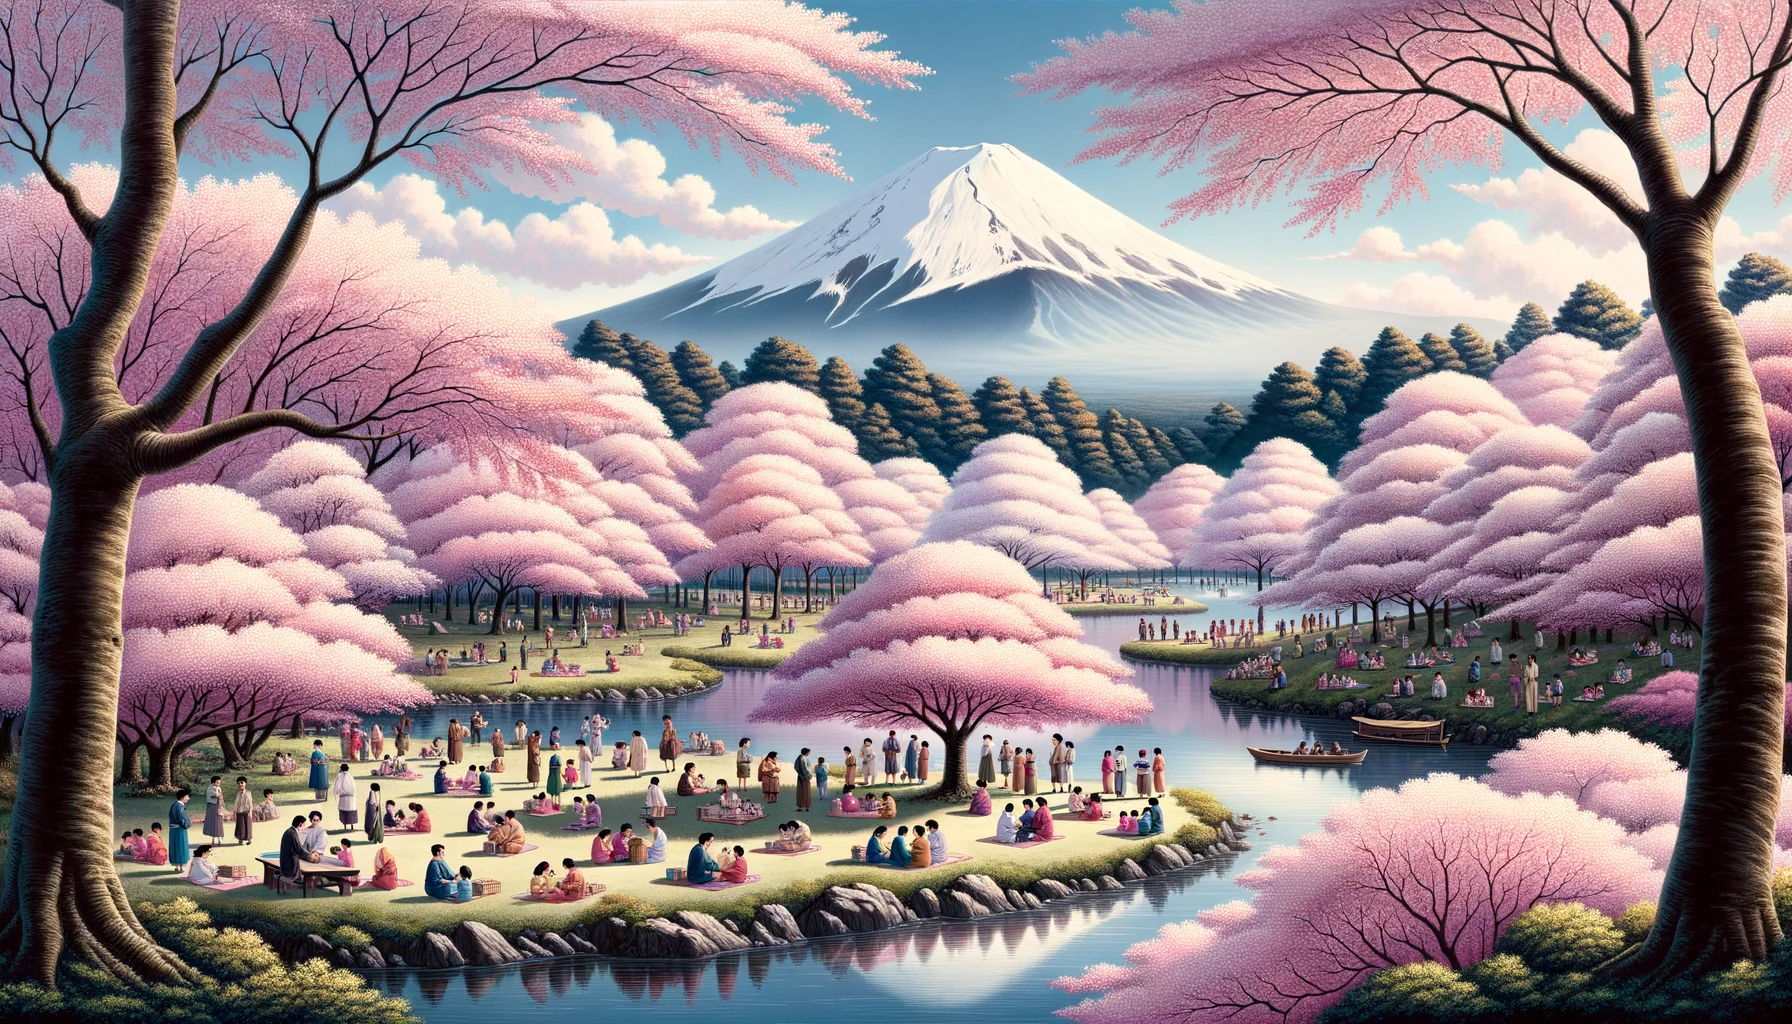 Illustration of a serene Japanese landscape during cherry blossom season. Sakura trees, in full bloom, create a canopy of pink, under which families and friends gather for picnics. Their laughter and conversations add a lively dimension to the otherwise tranquil setting. Dominating the horizon is the iconic Mount Fuji, its grandeur amplified by the delicate blossoms in the foreground. A pond, calm and still, captures the reflections of the trees and the mountain, adding depth to the scene.